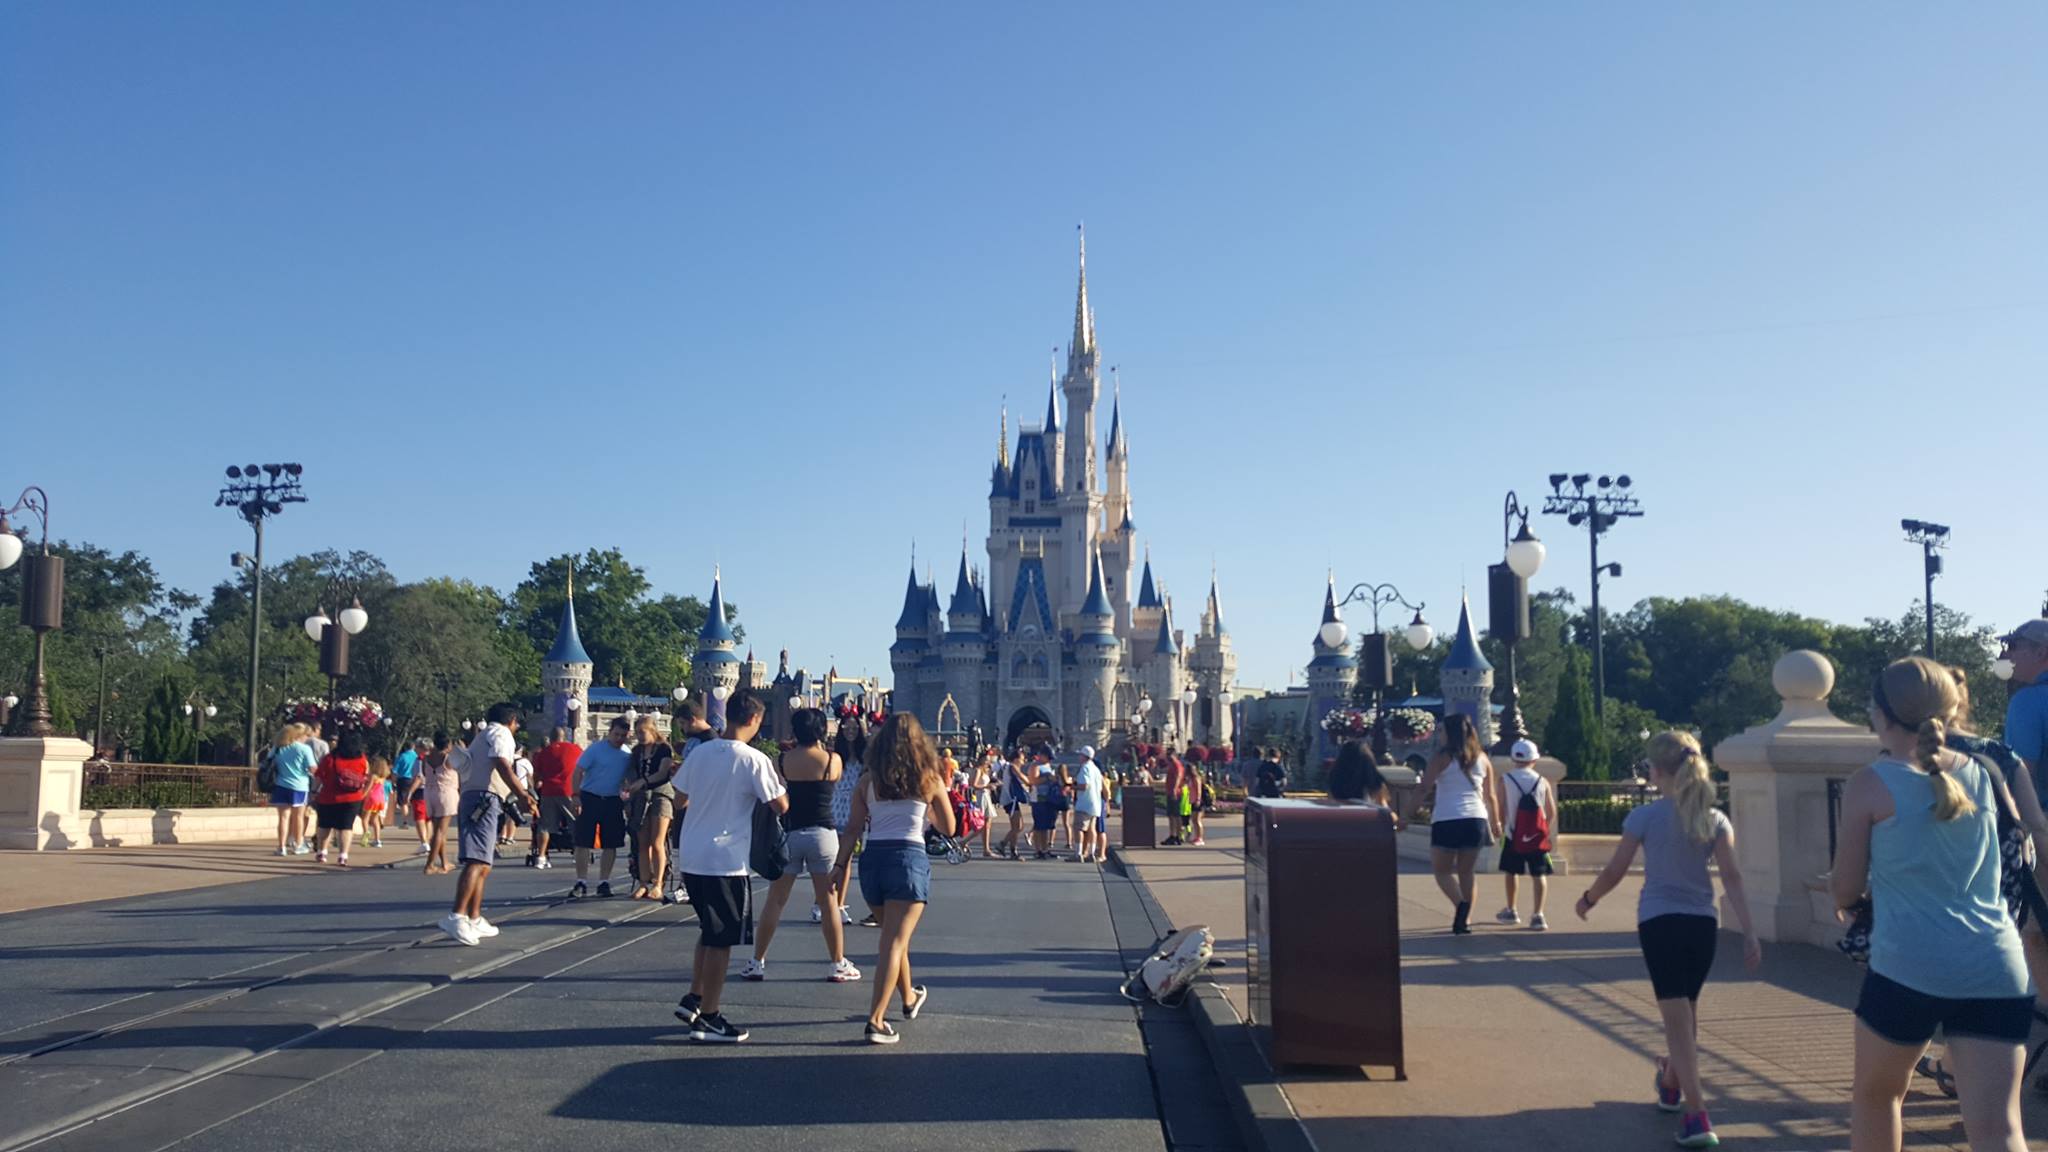 Keeping your cell phone battery charged at the Disney Parks